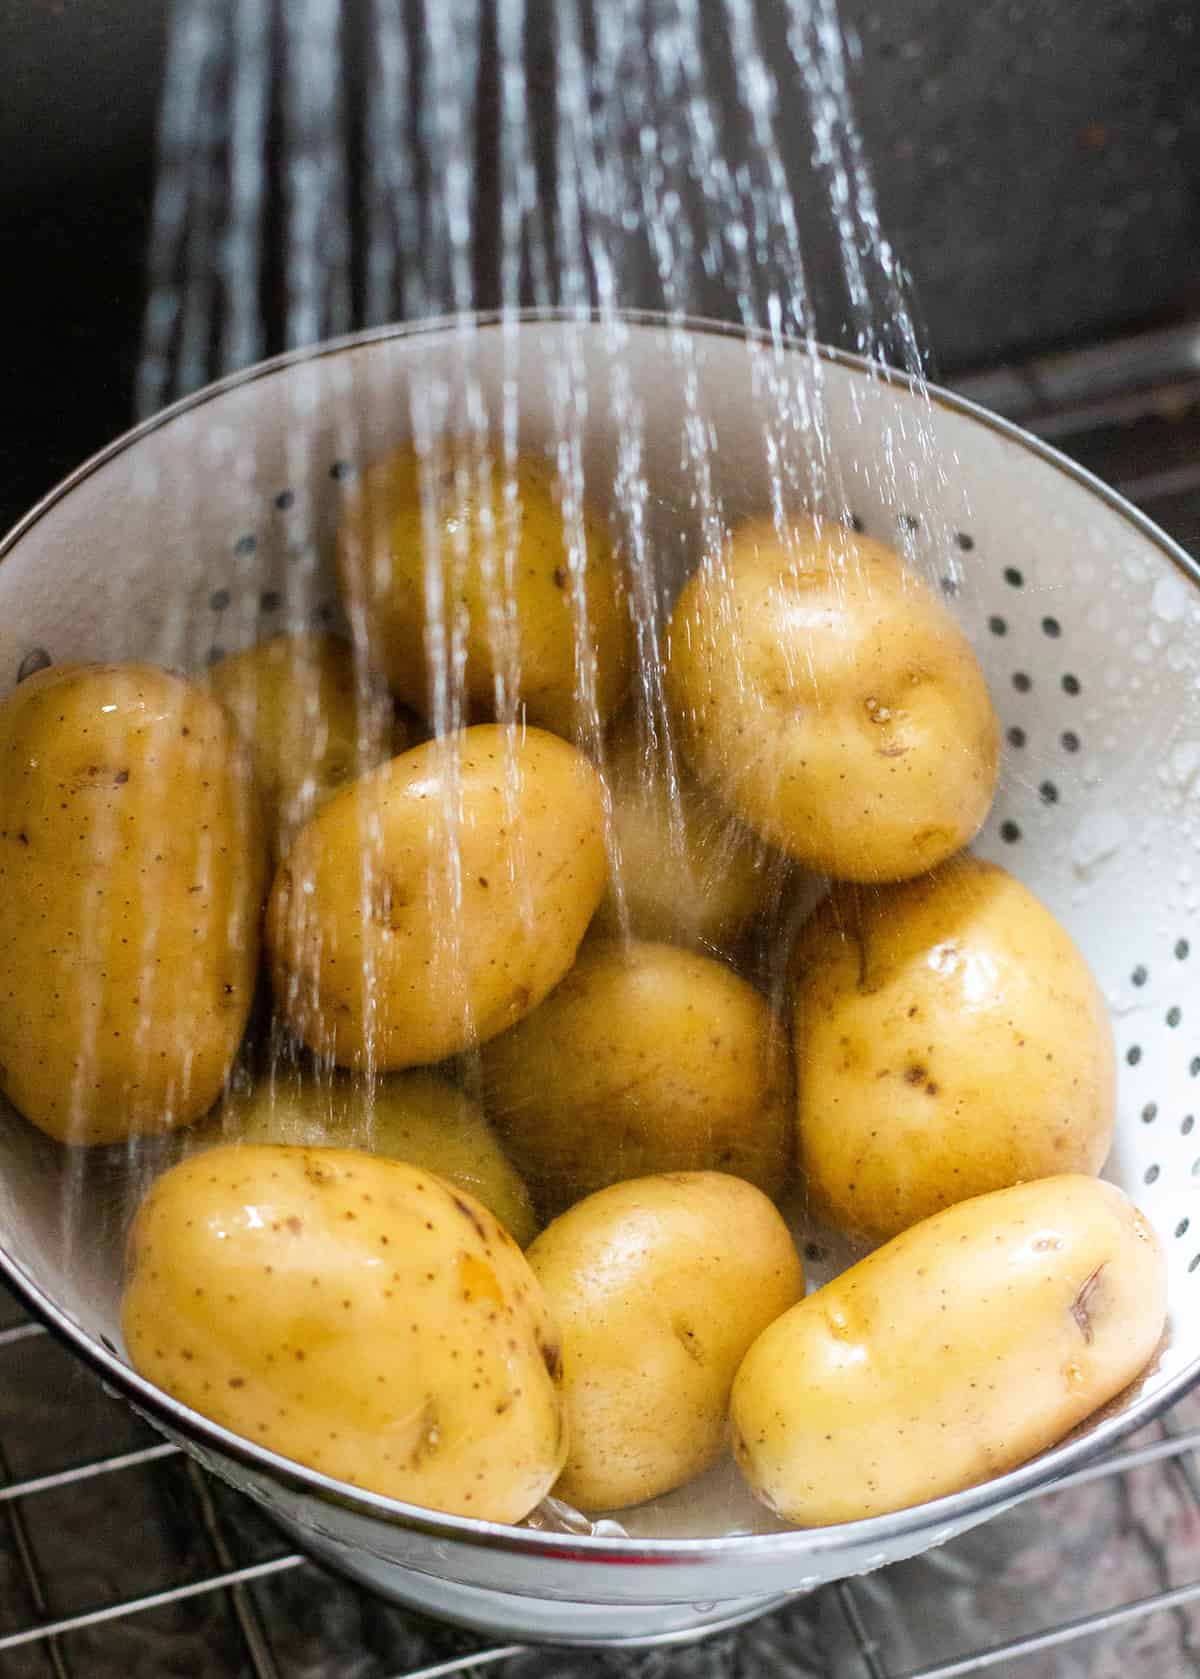 Yukon Gold Potatoes being washed in a collander under running water.